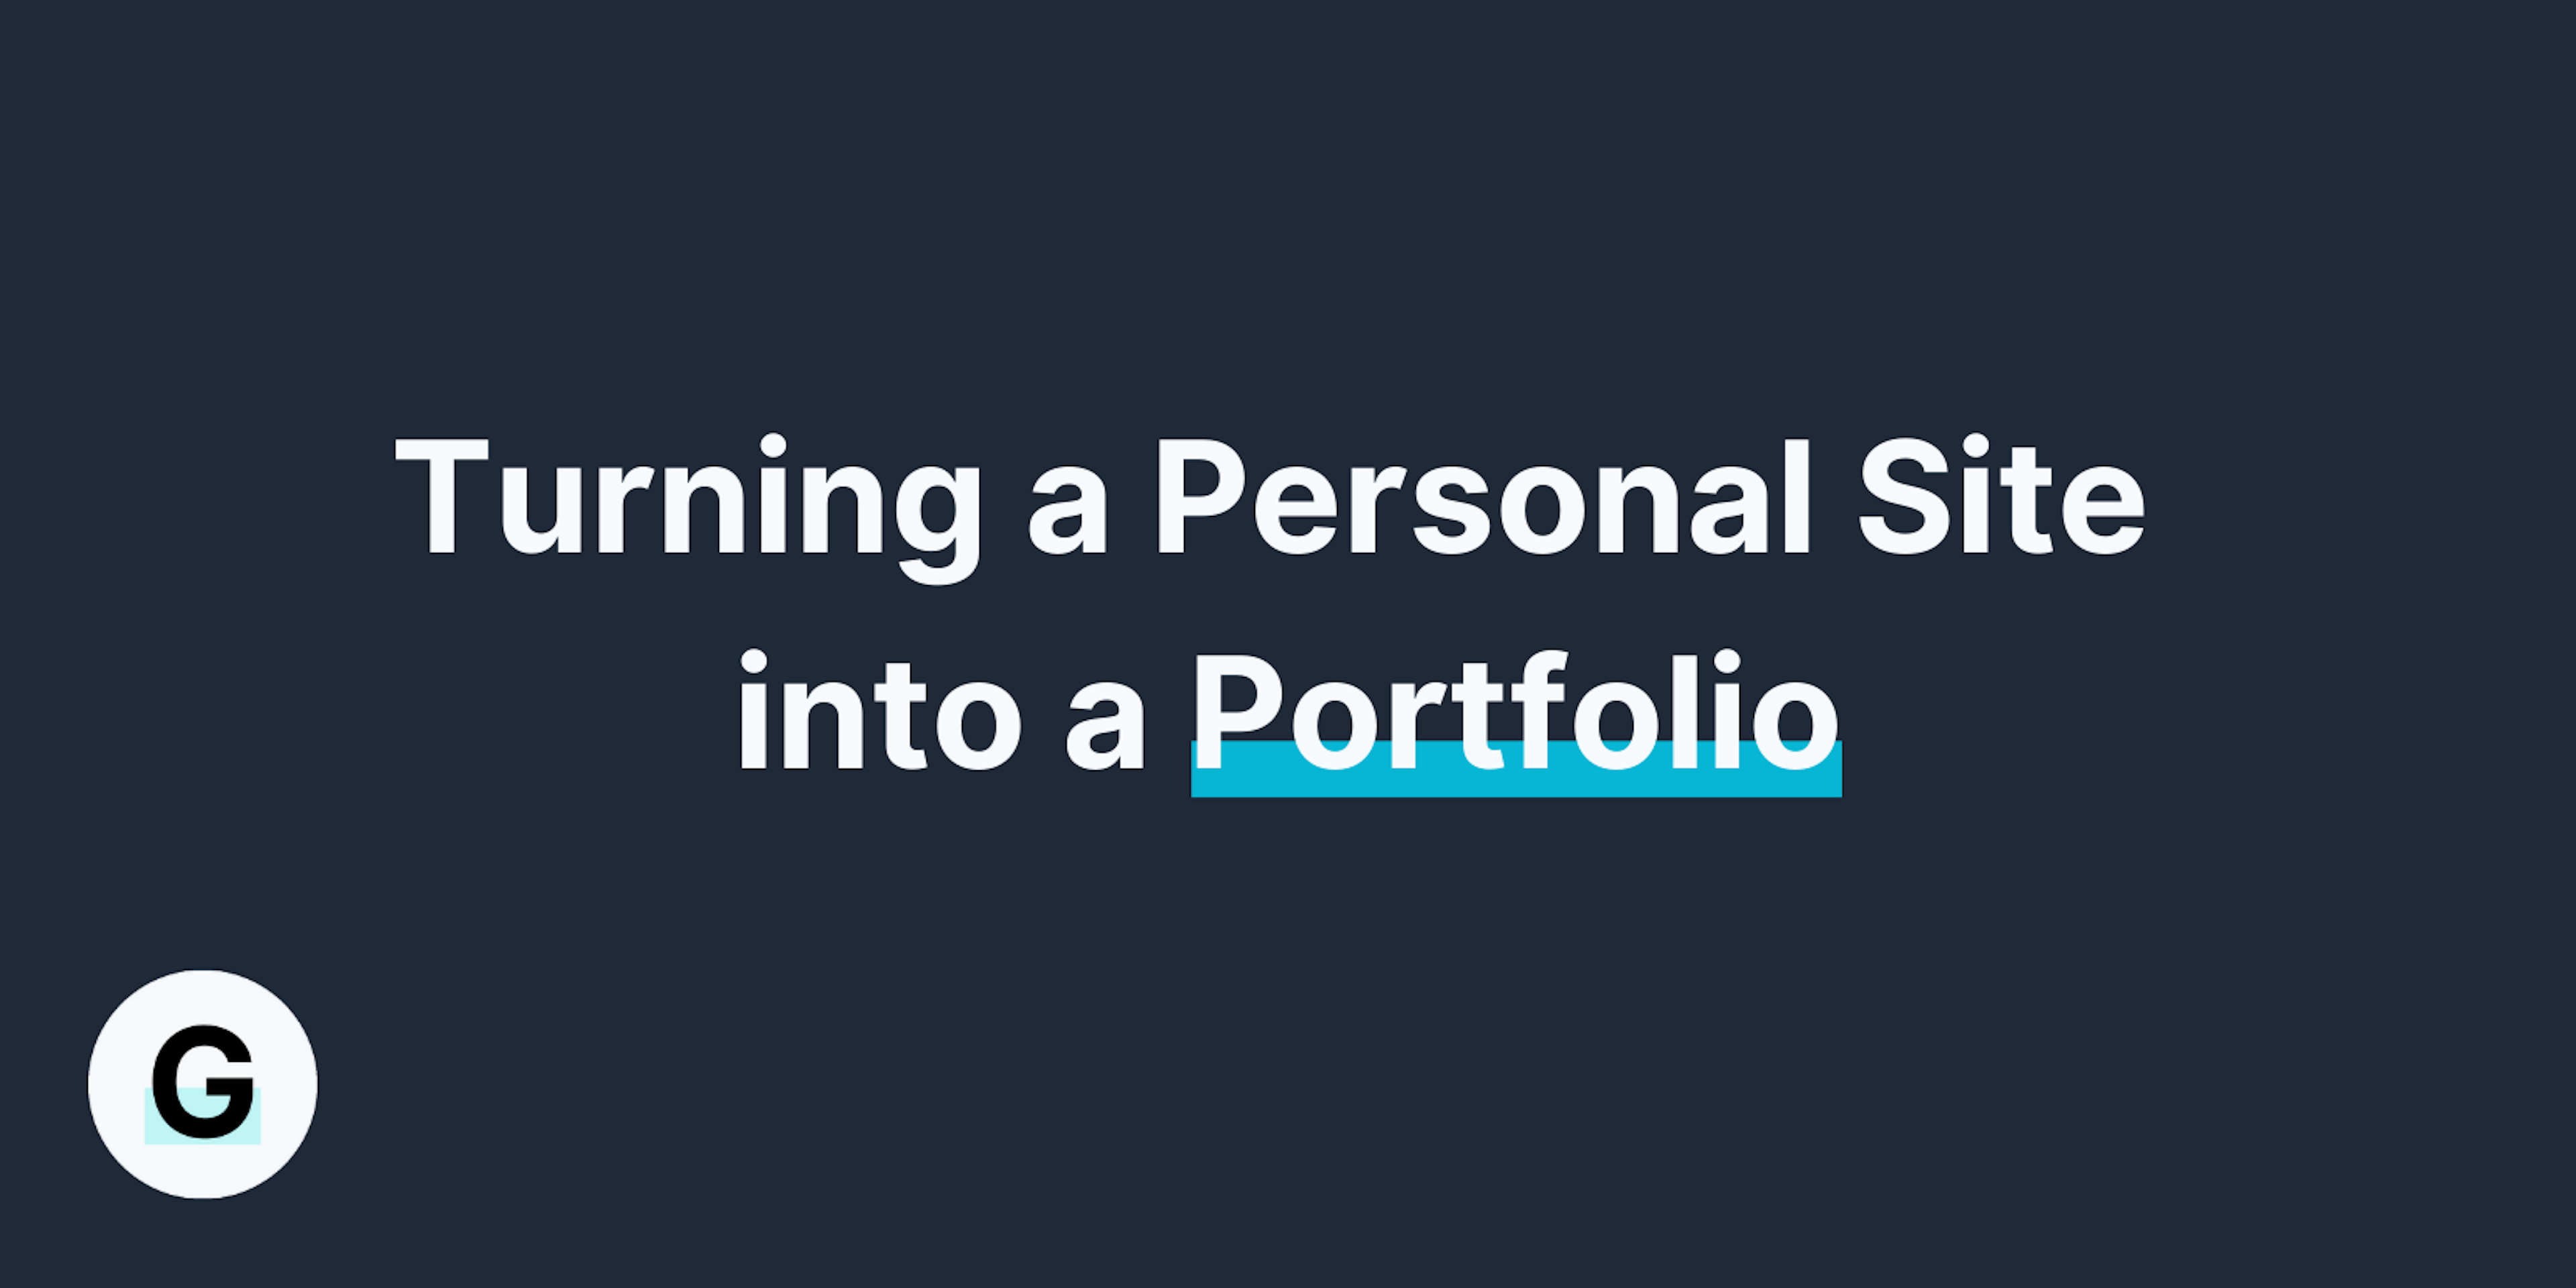 Turning a Personal Site into a Portfolio